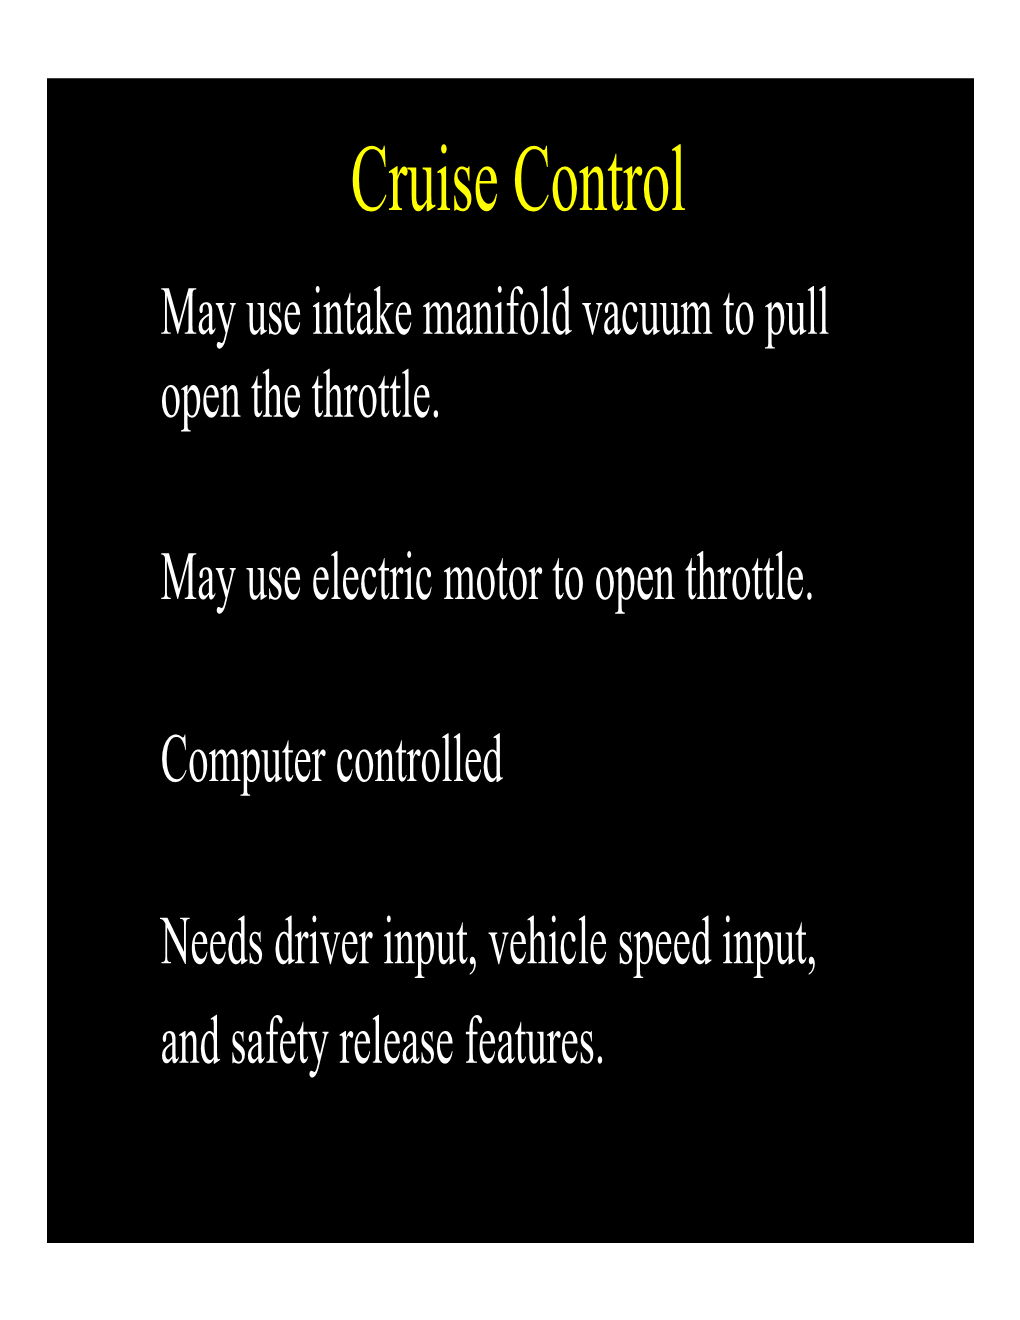 Cruise Control and Air Bags